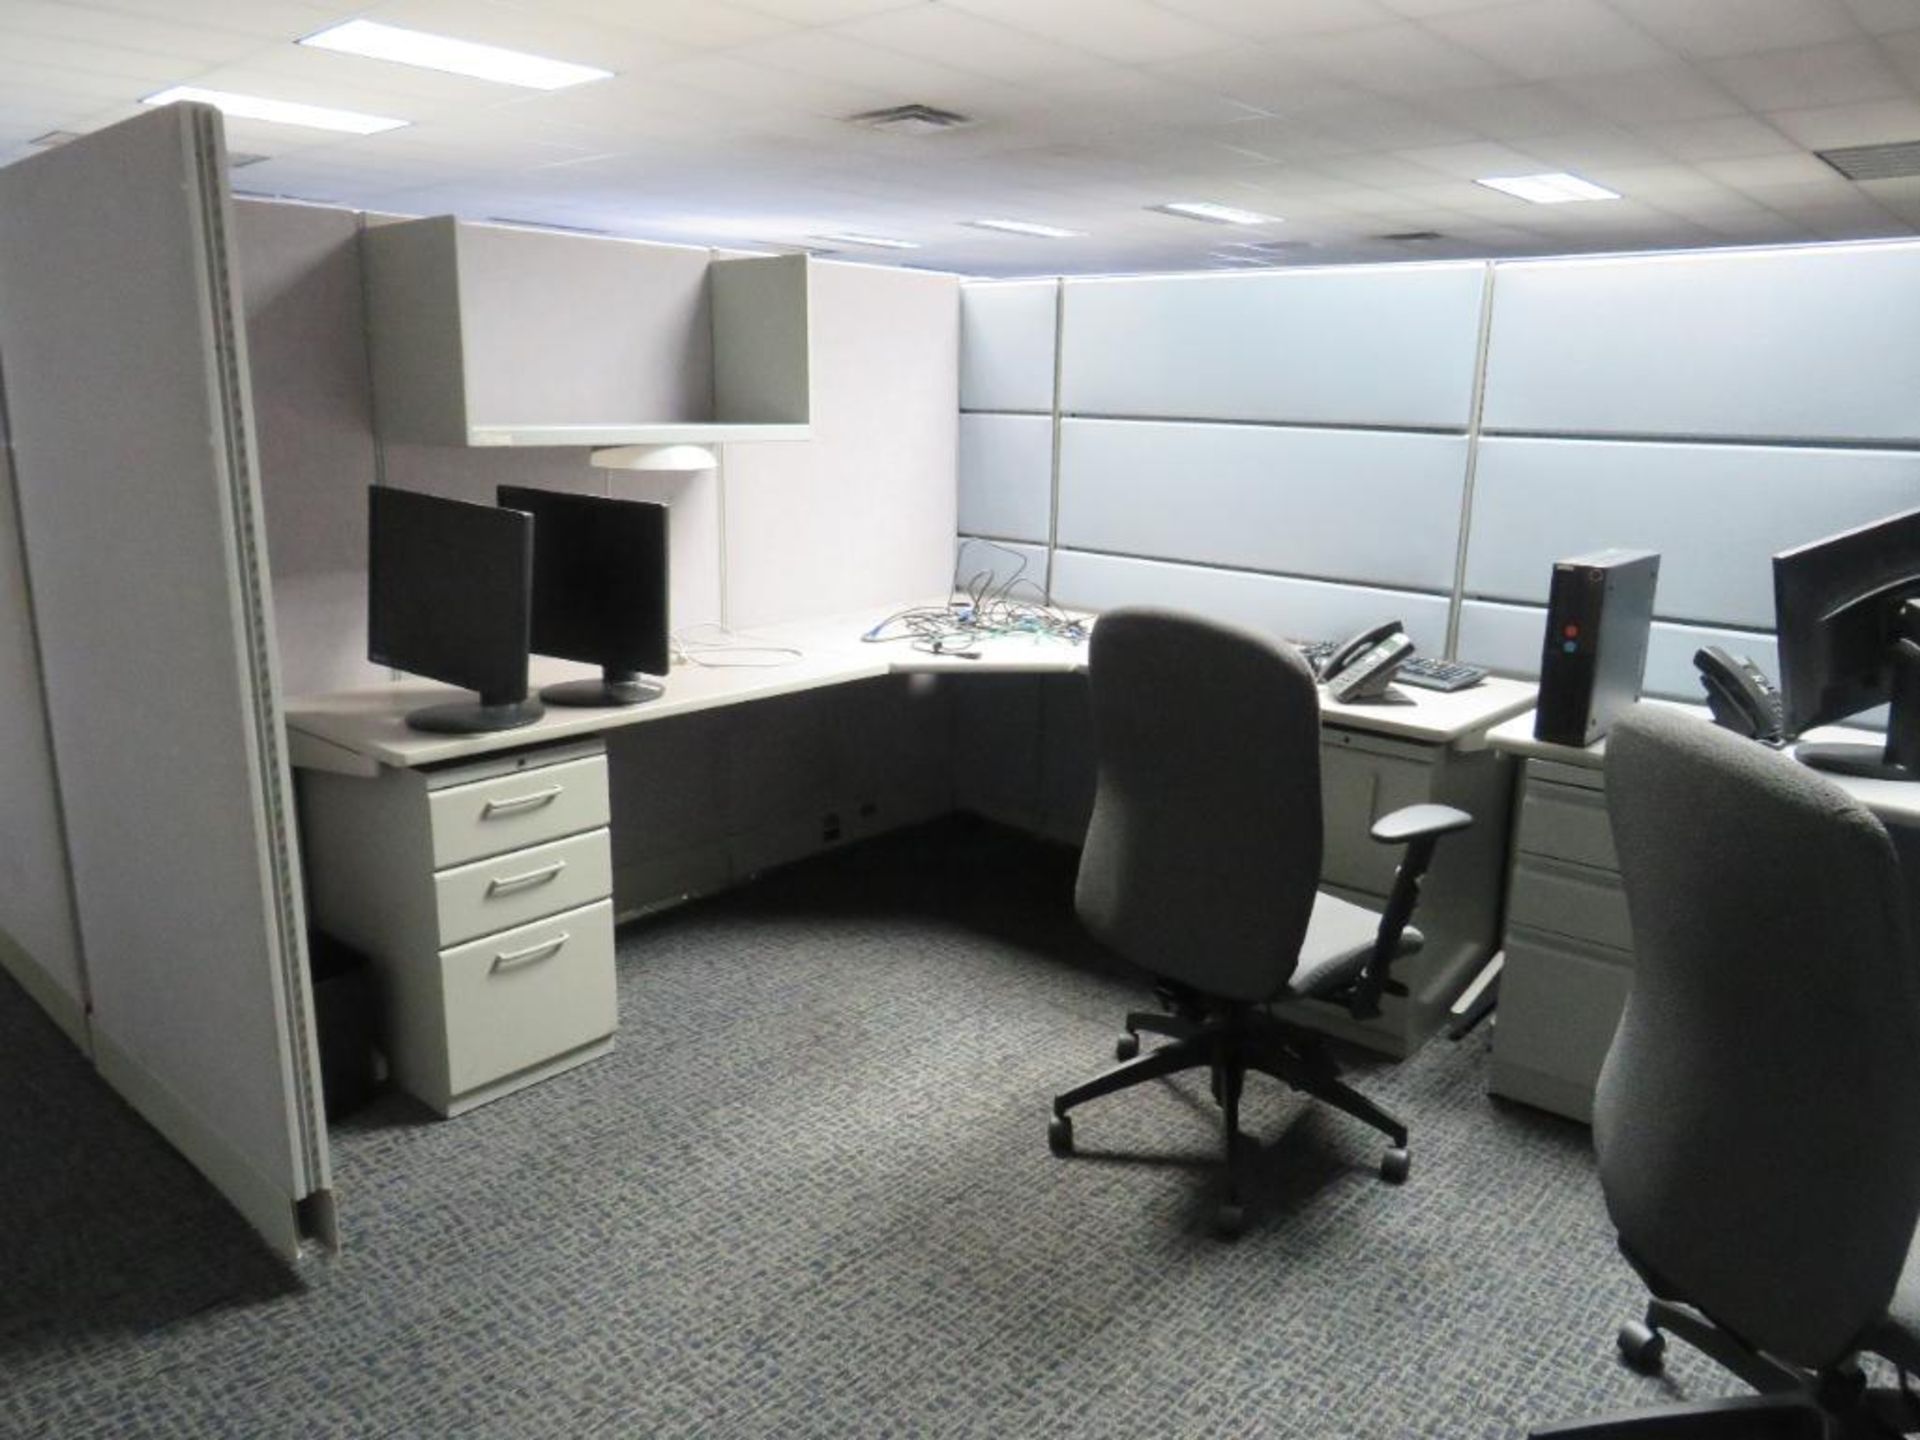 Lot c/o: Large Quantity of Cubicle Partitions Appx. 12,000-Sq. Ft. of 67" & 54" Tall - Image 2 of 6